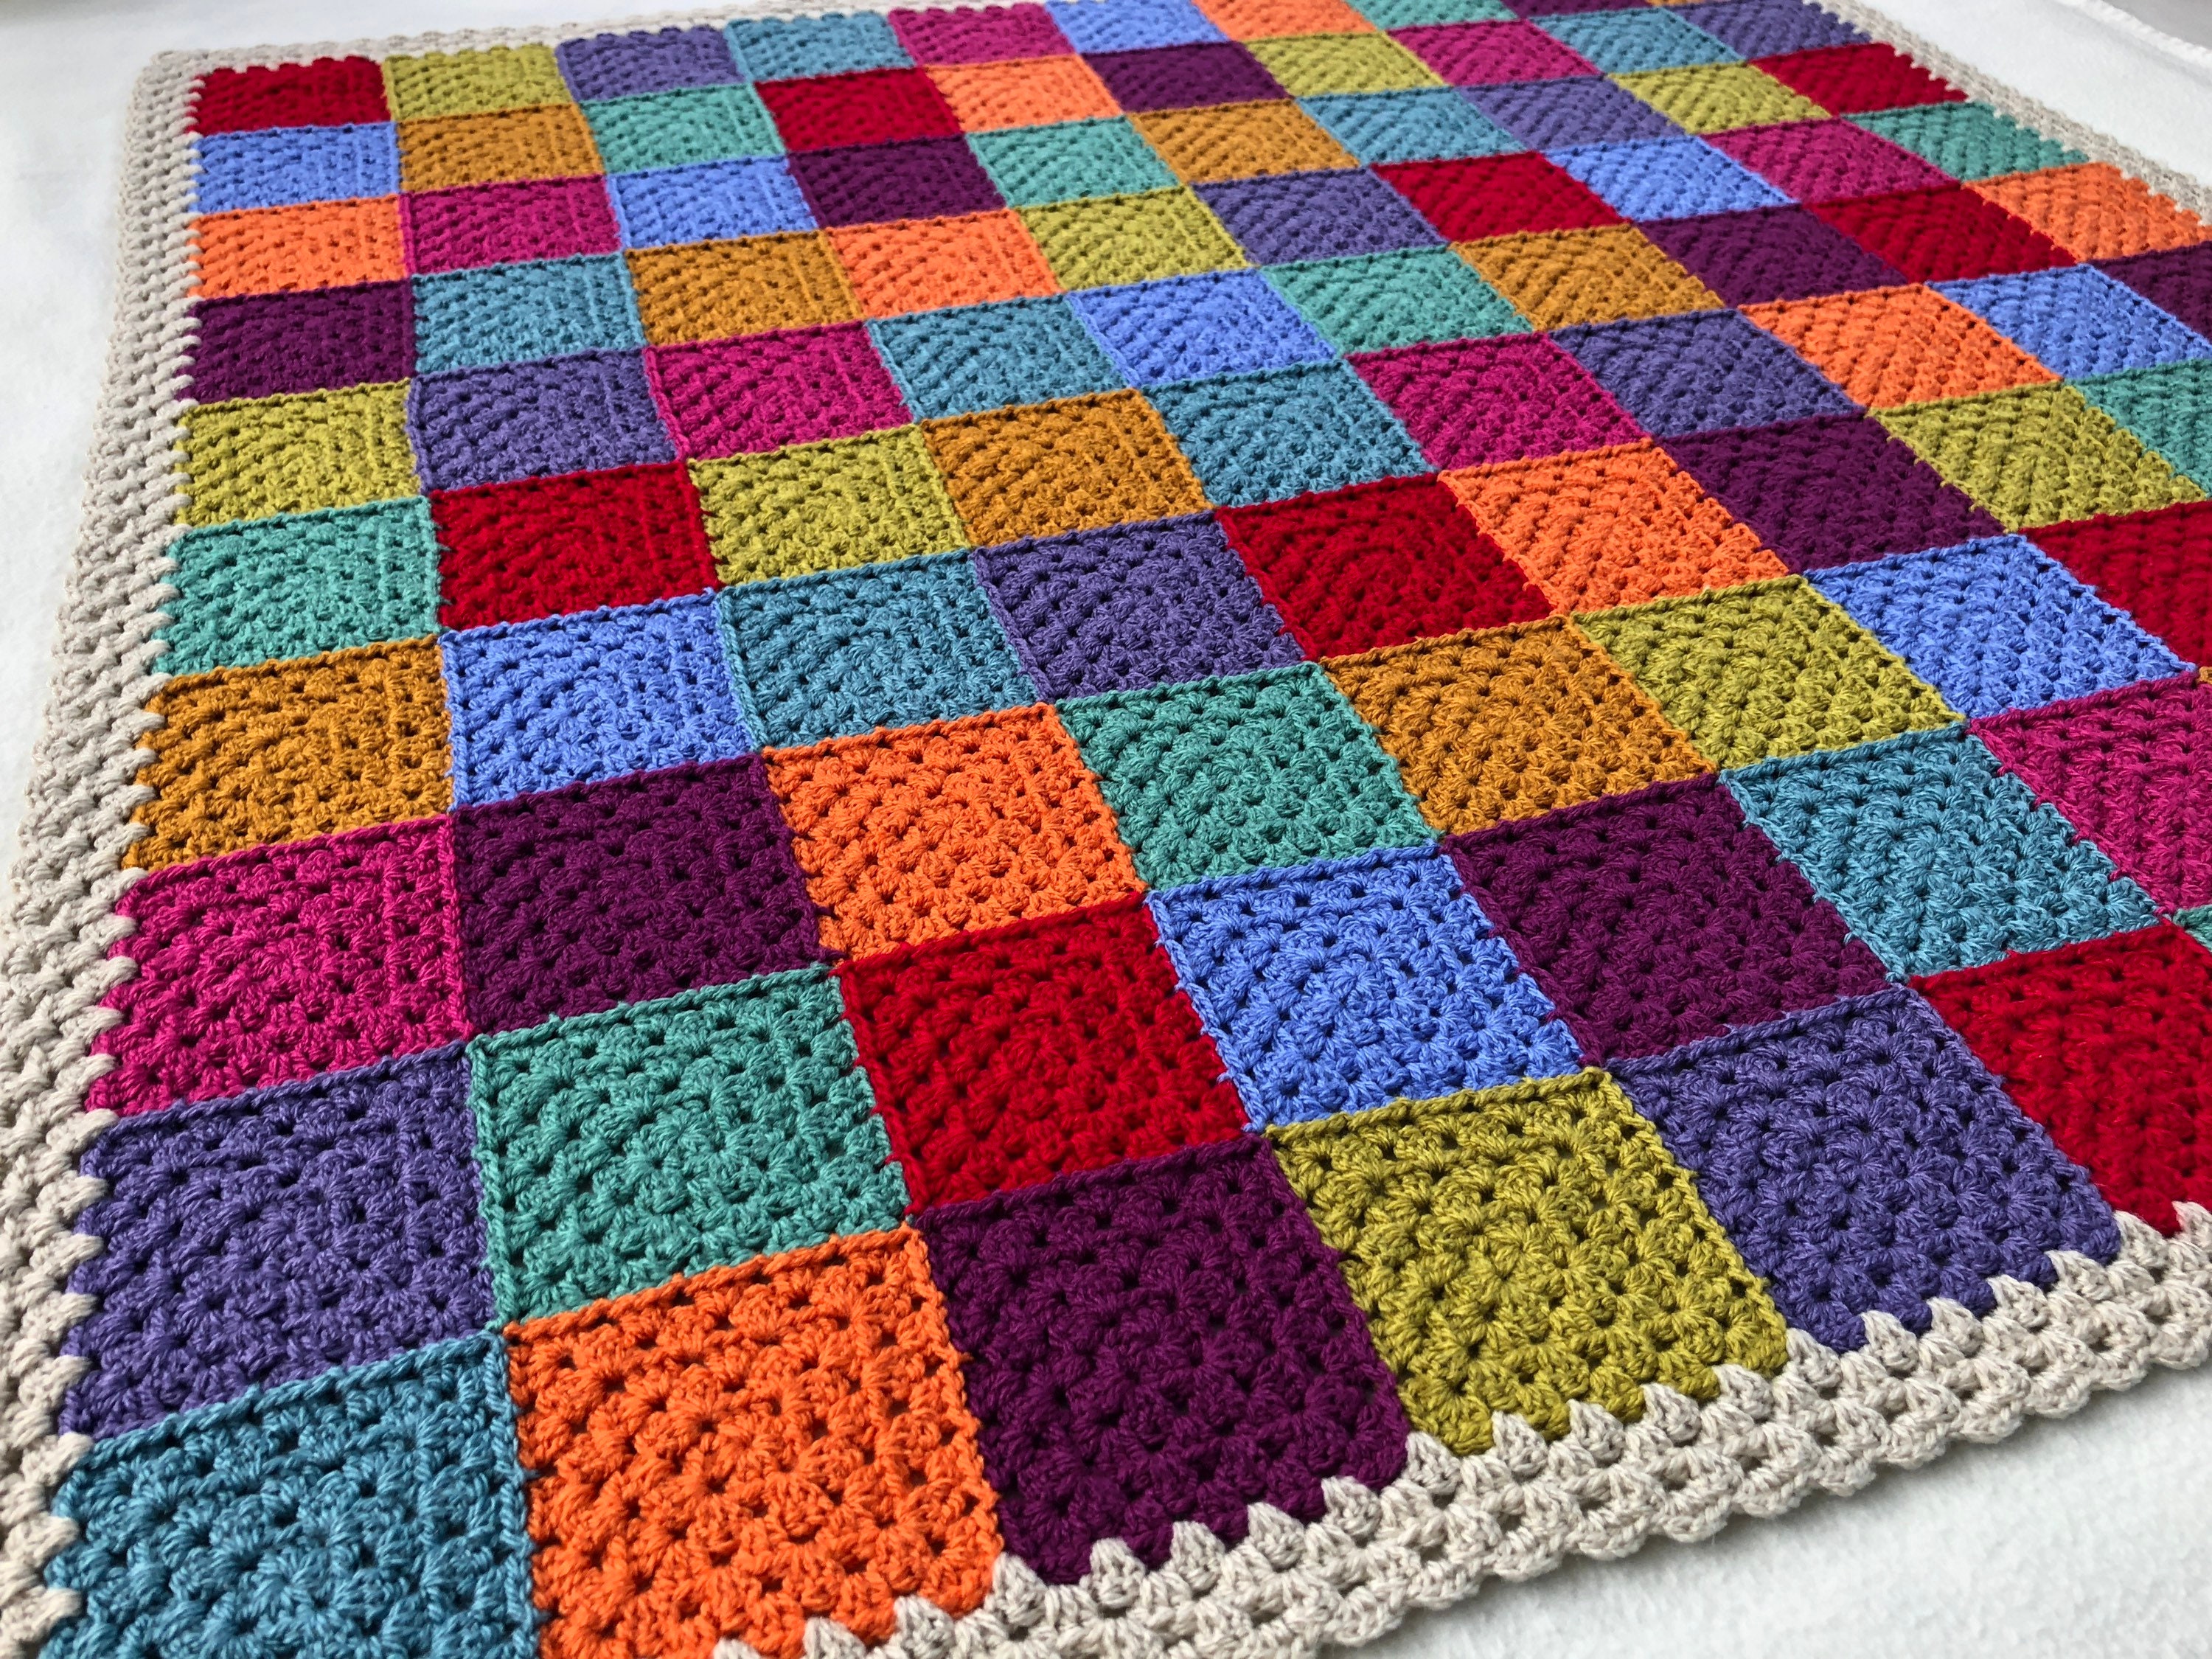 Colorful Handmade Granny Square Crochet Afghan Grannycore Blanket Size 83x41